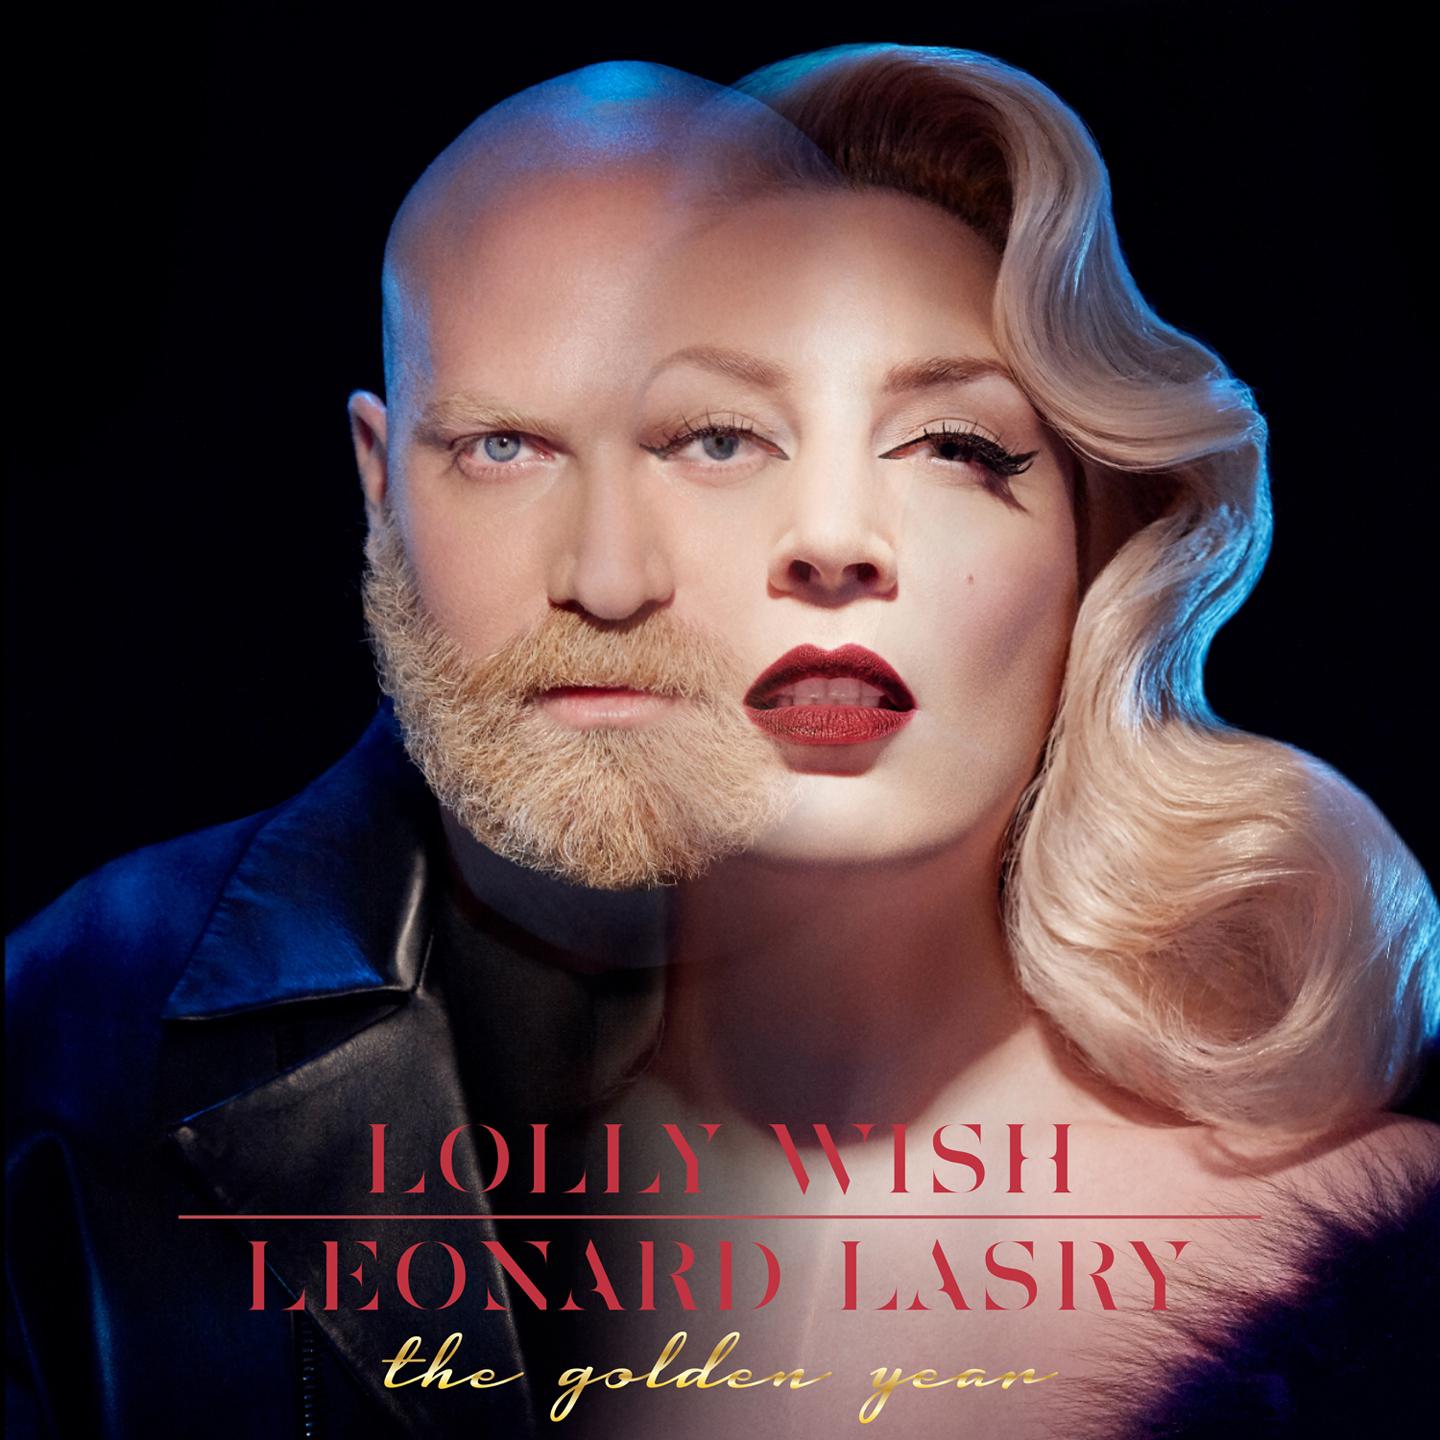 Lolly Wish - The Golden Year